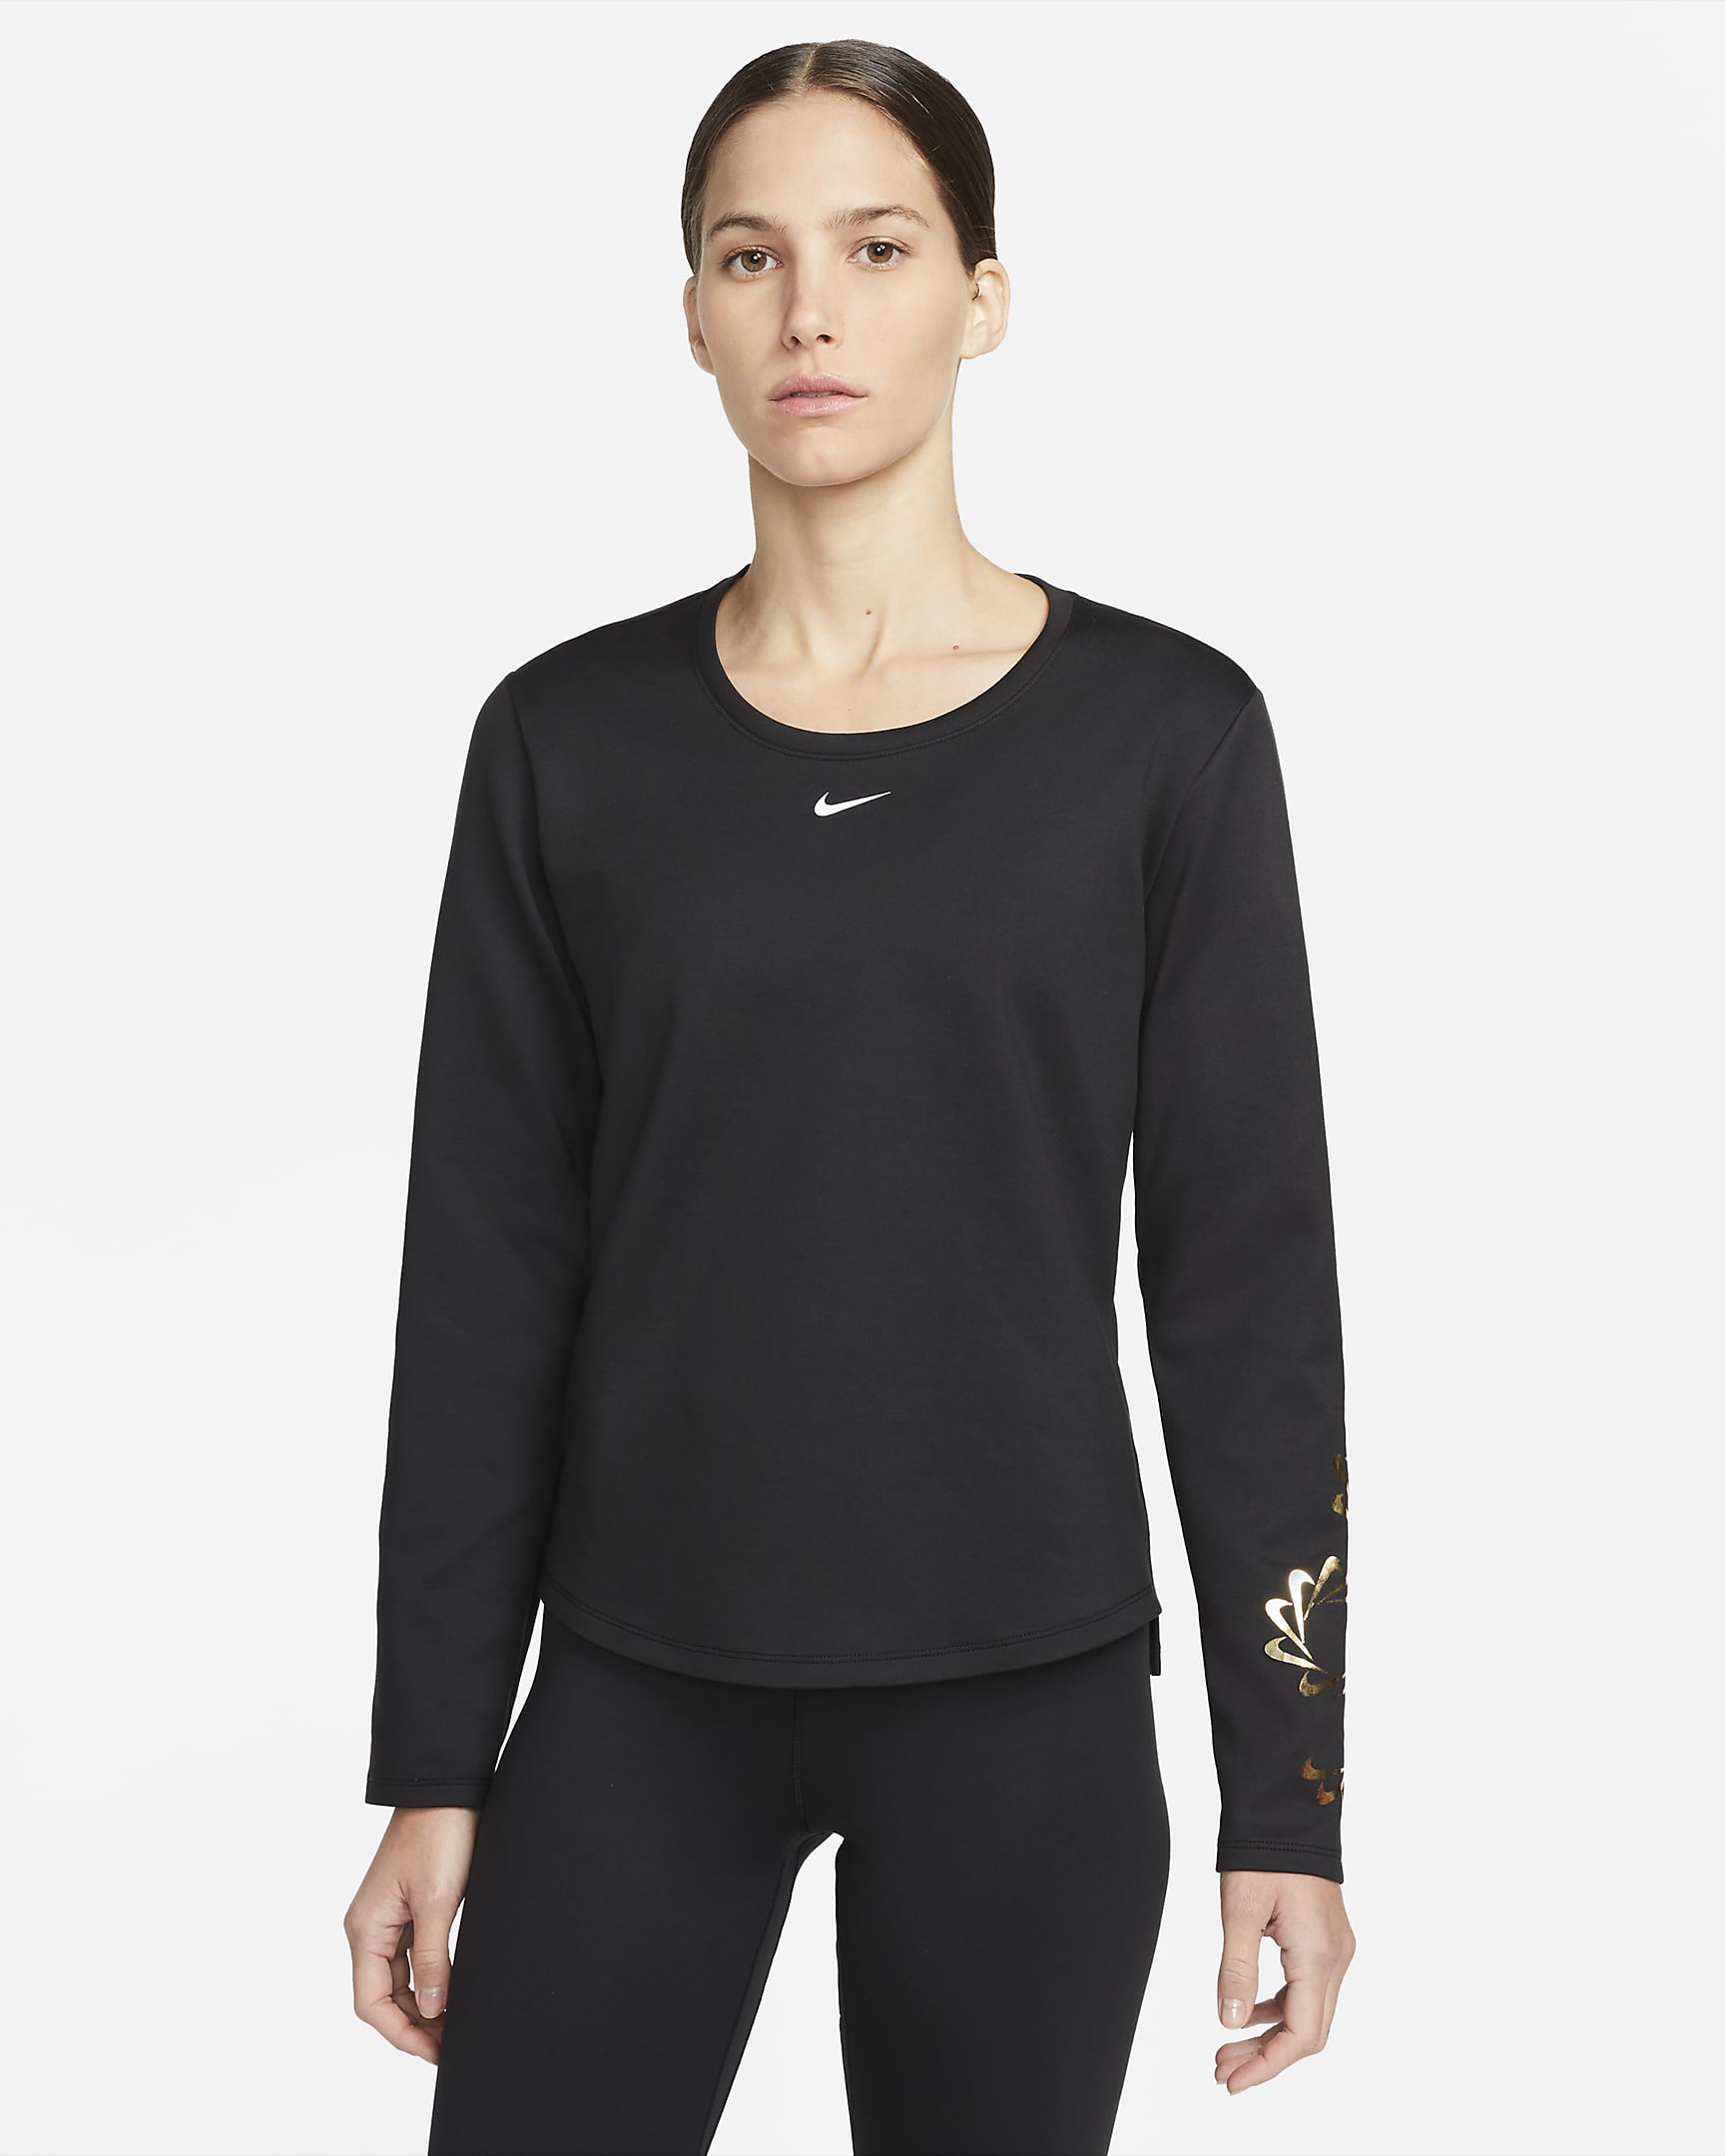 Nike Therma-FIT One Women's Graphic Long-Sleeve Top. Nike IL